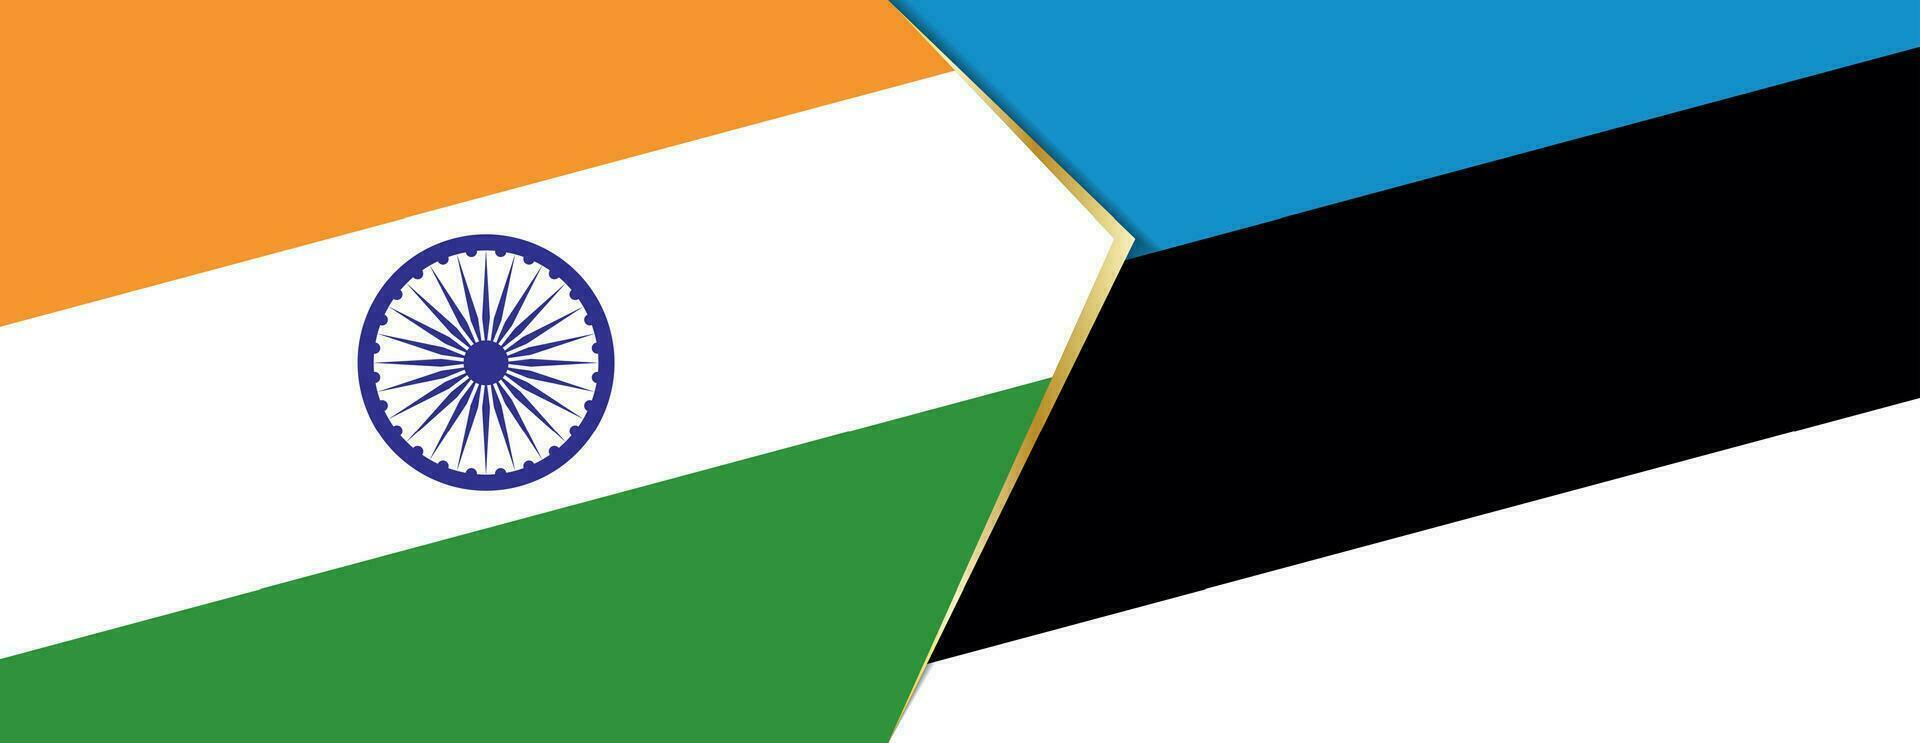 India and Estonia flags, two vector flags.